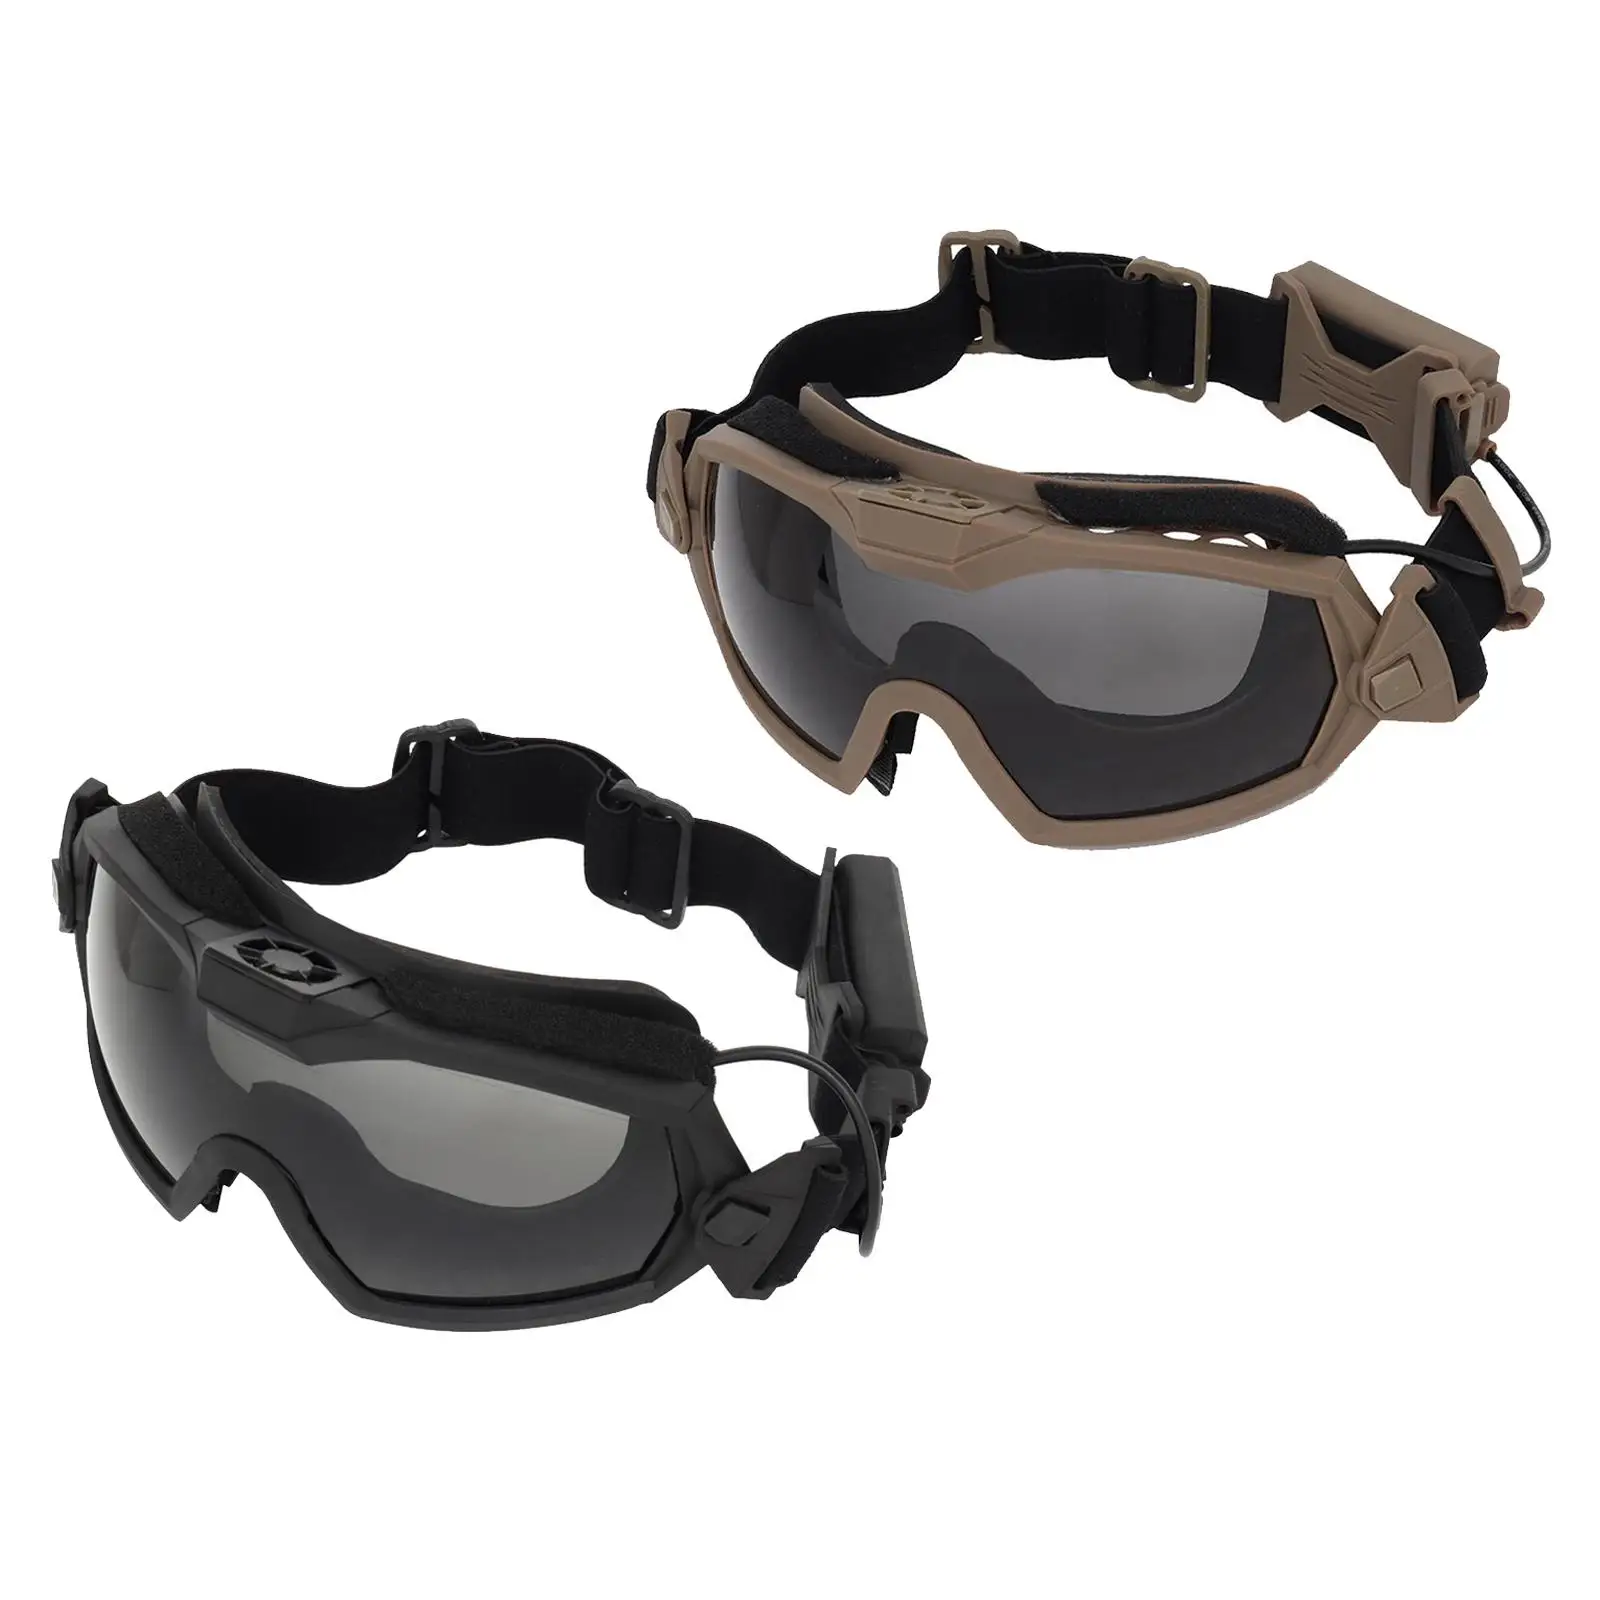 Anti-Shocks with Fan,400 Anti-Fog  Safetys Glasses with 2 Interchangeable Lens for Hunting Bike Riding